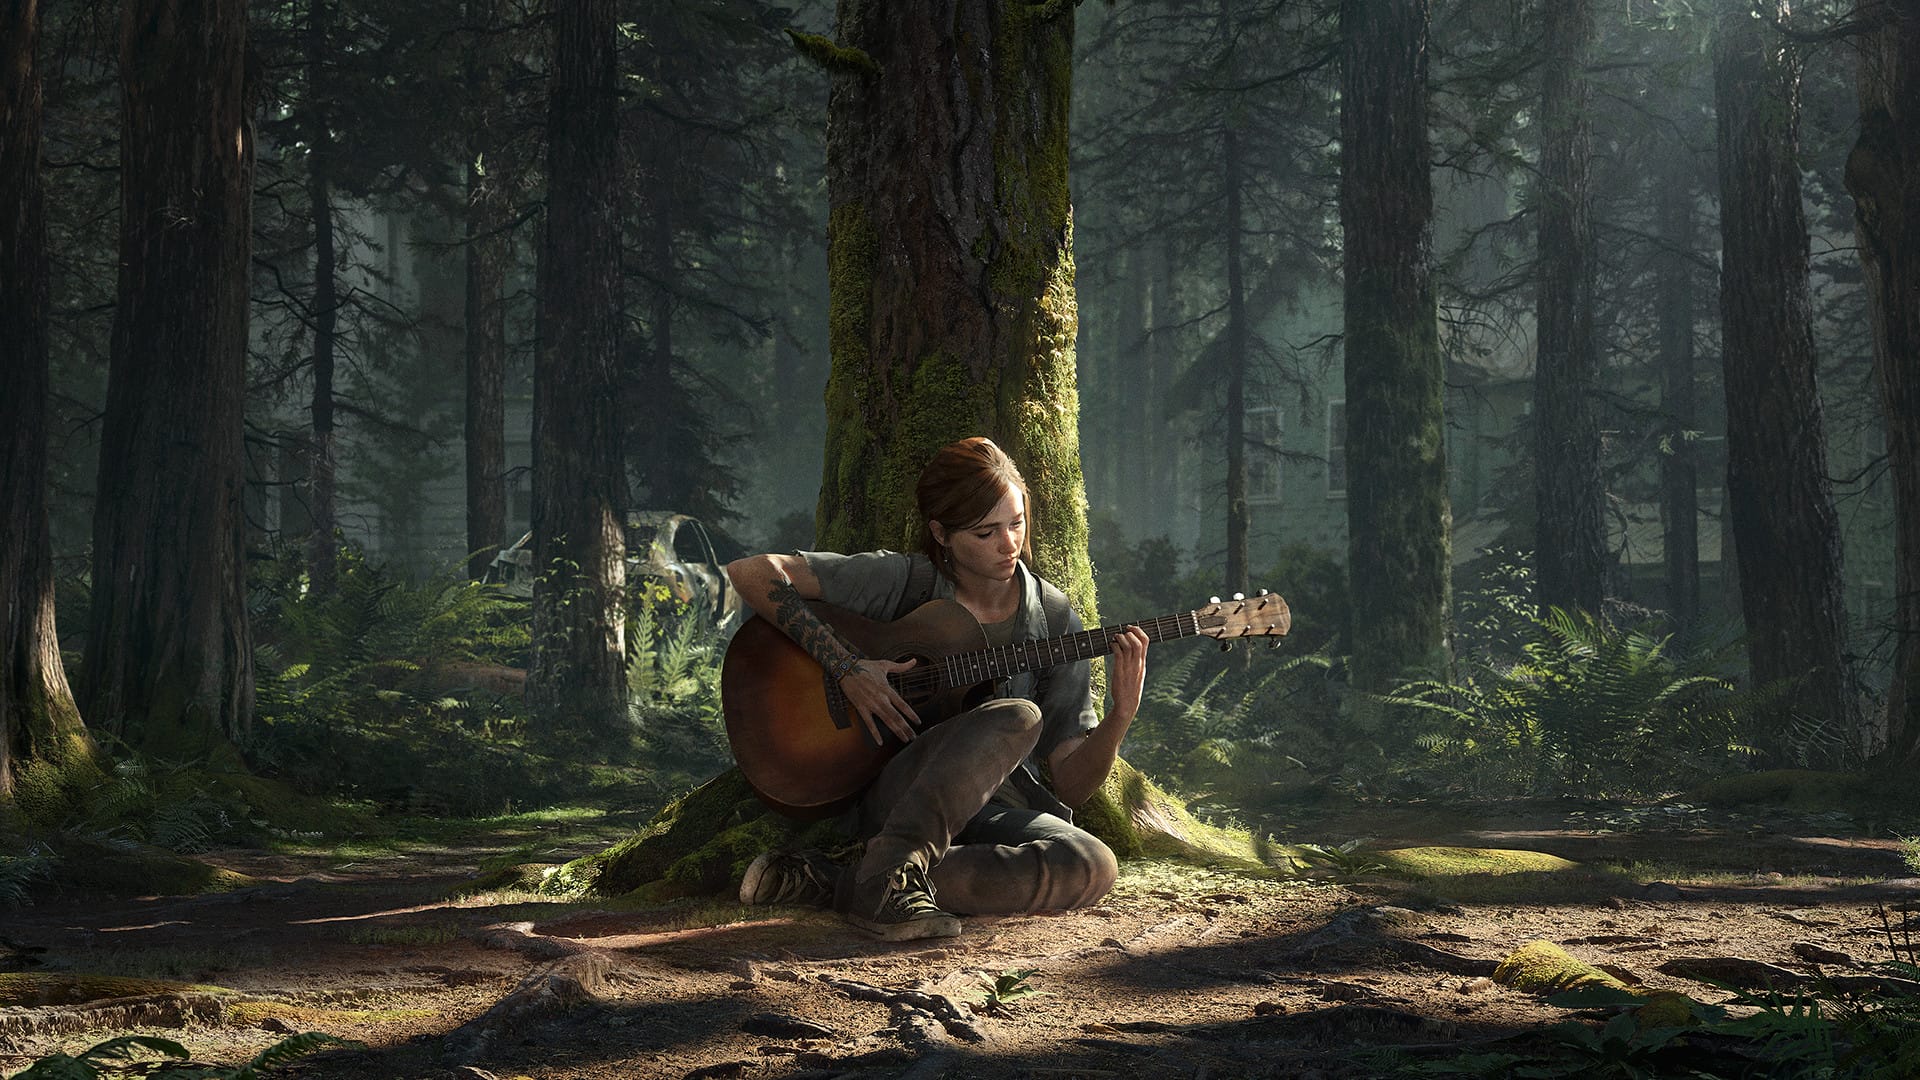 The Last of Us Part II Surpassed God of War as The Most Pre-Ordered PS4 Exclusive in Brazil